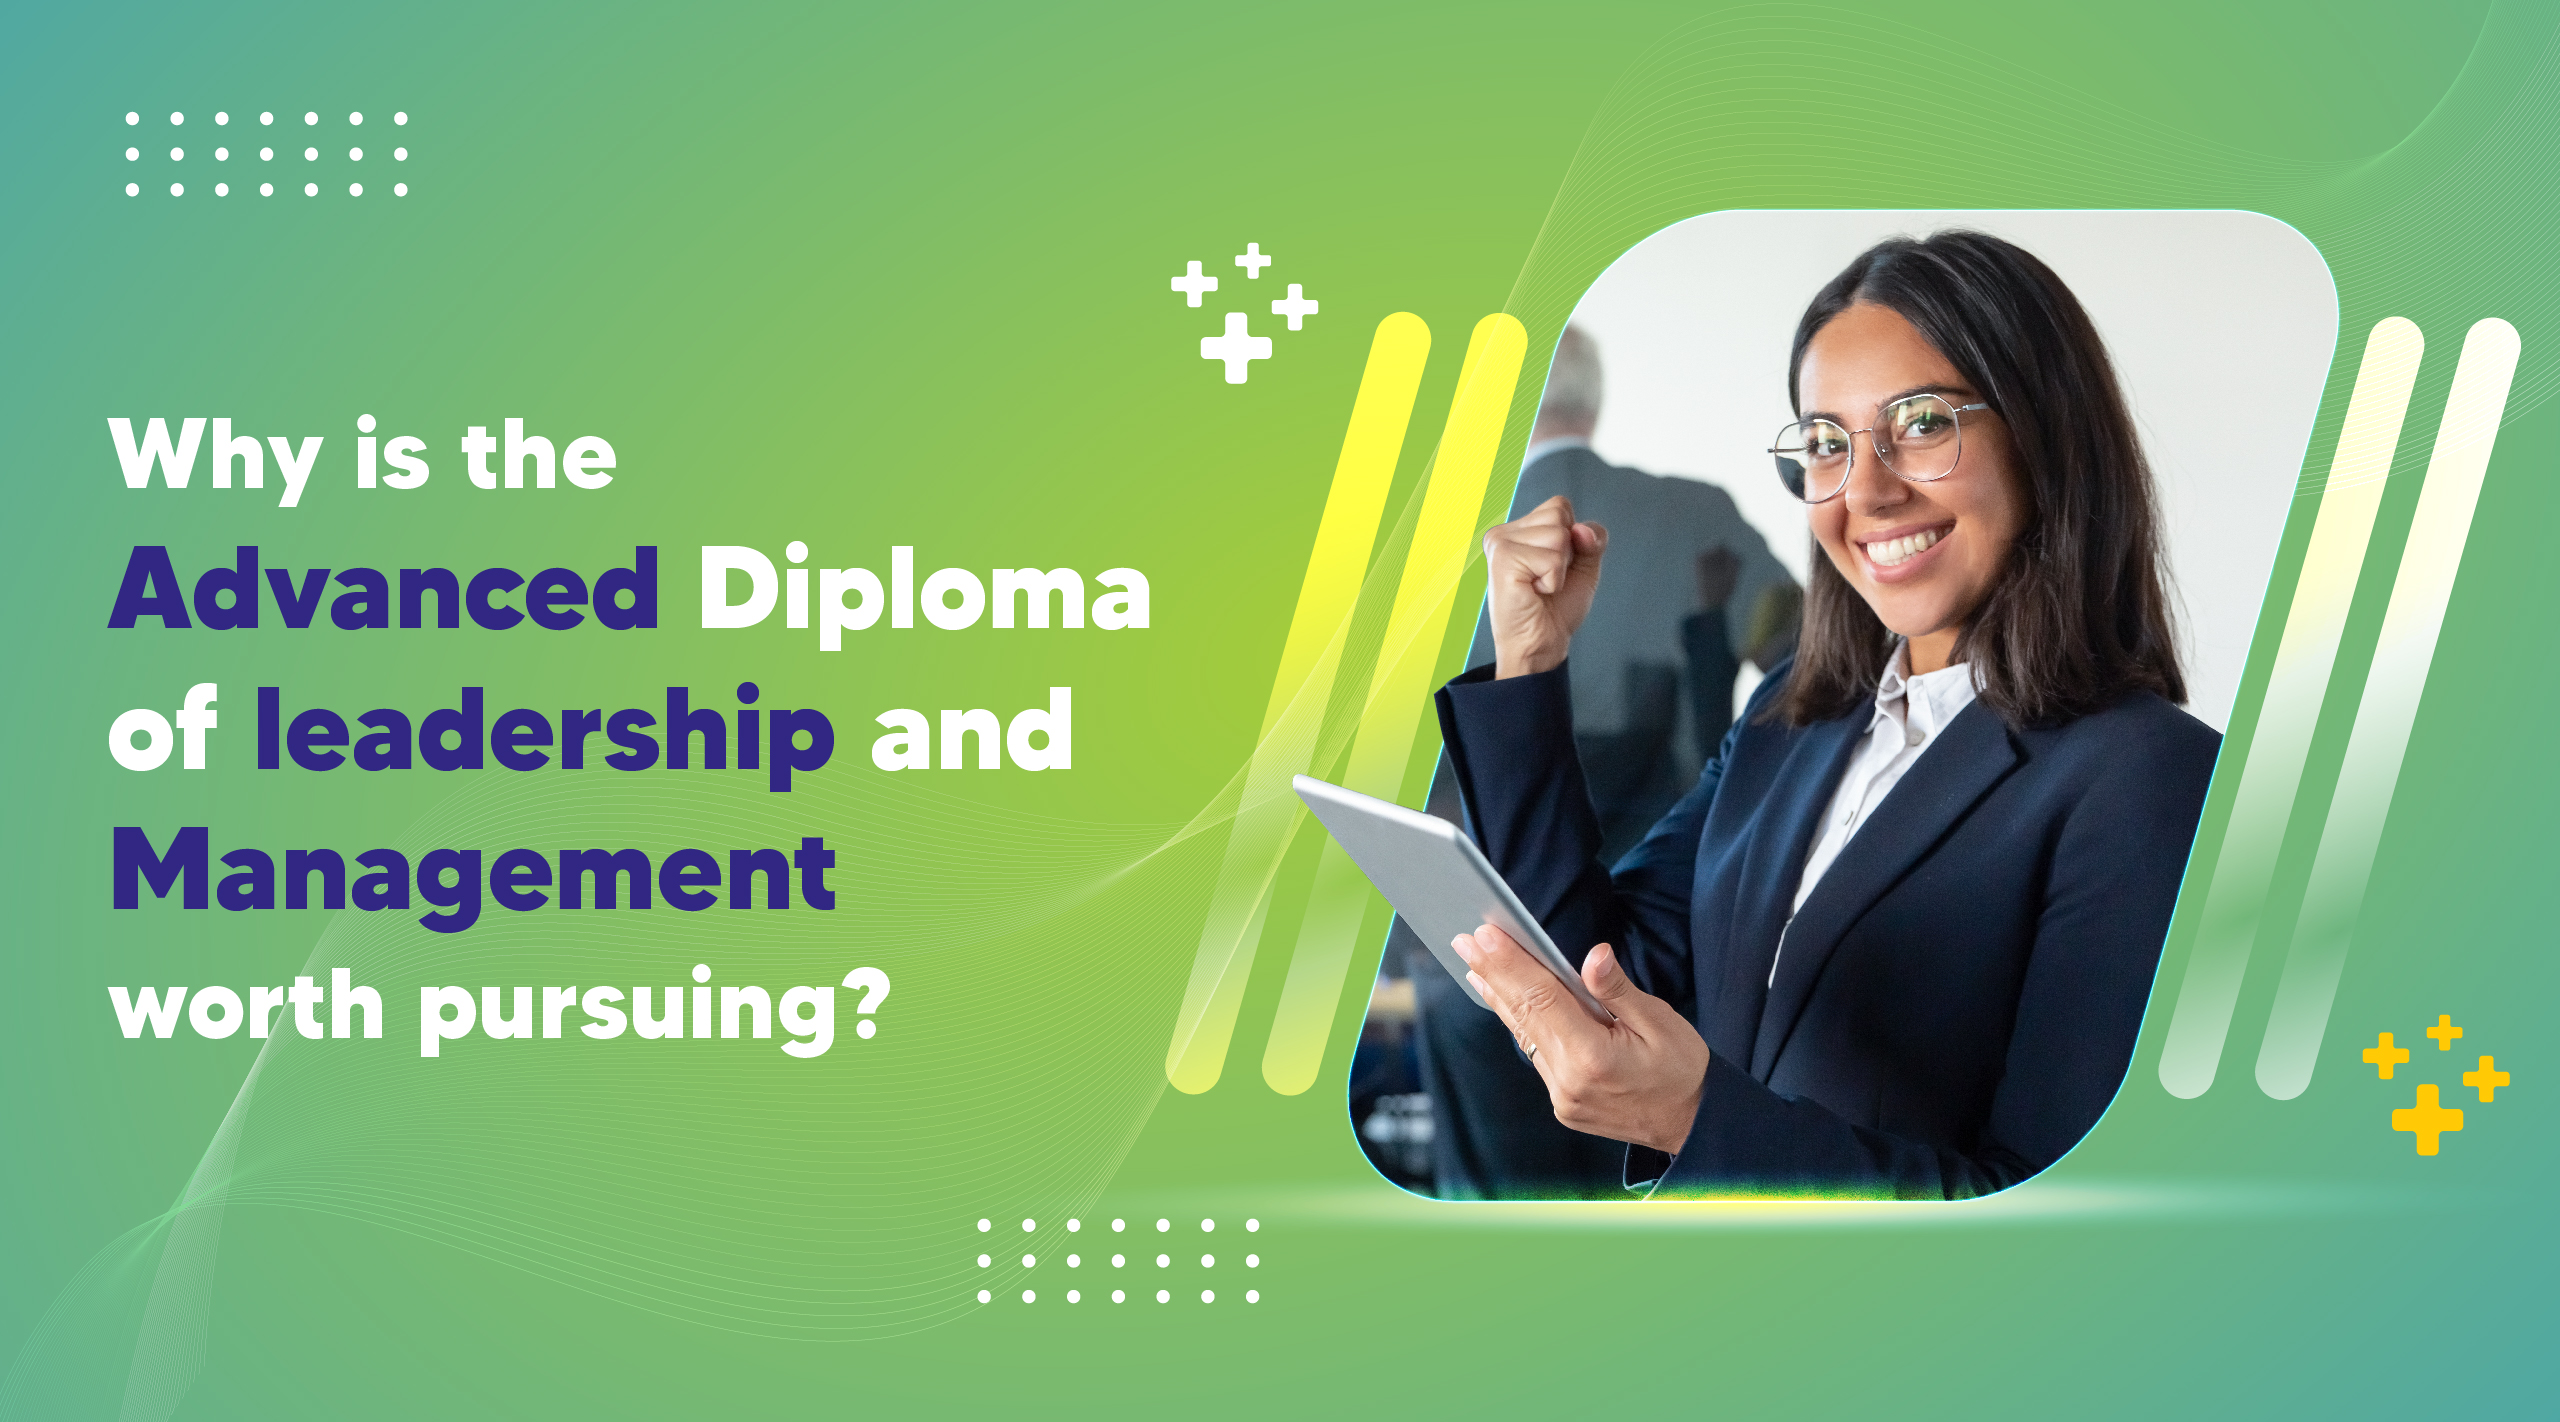 why is advanced diploma of leadership and management worth pursuing?